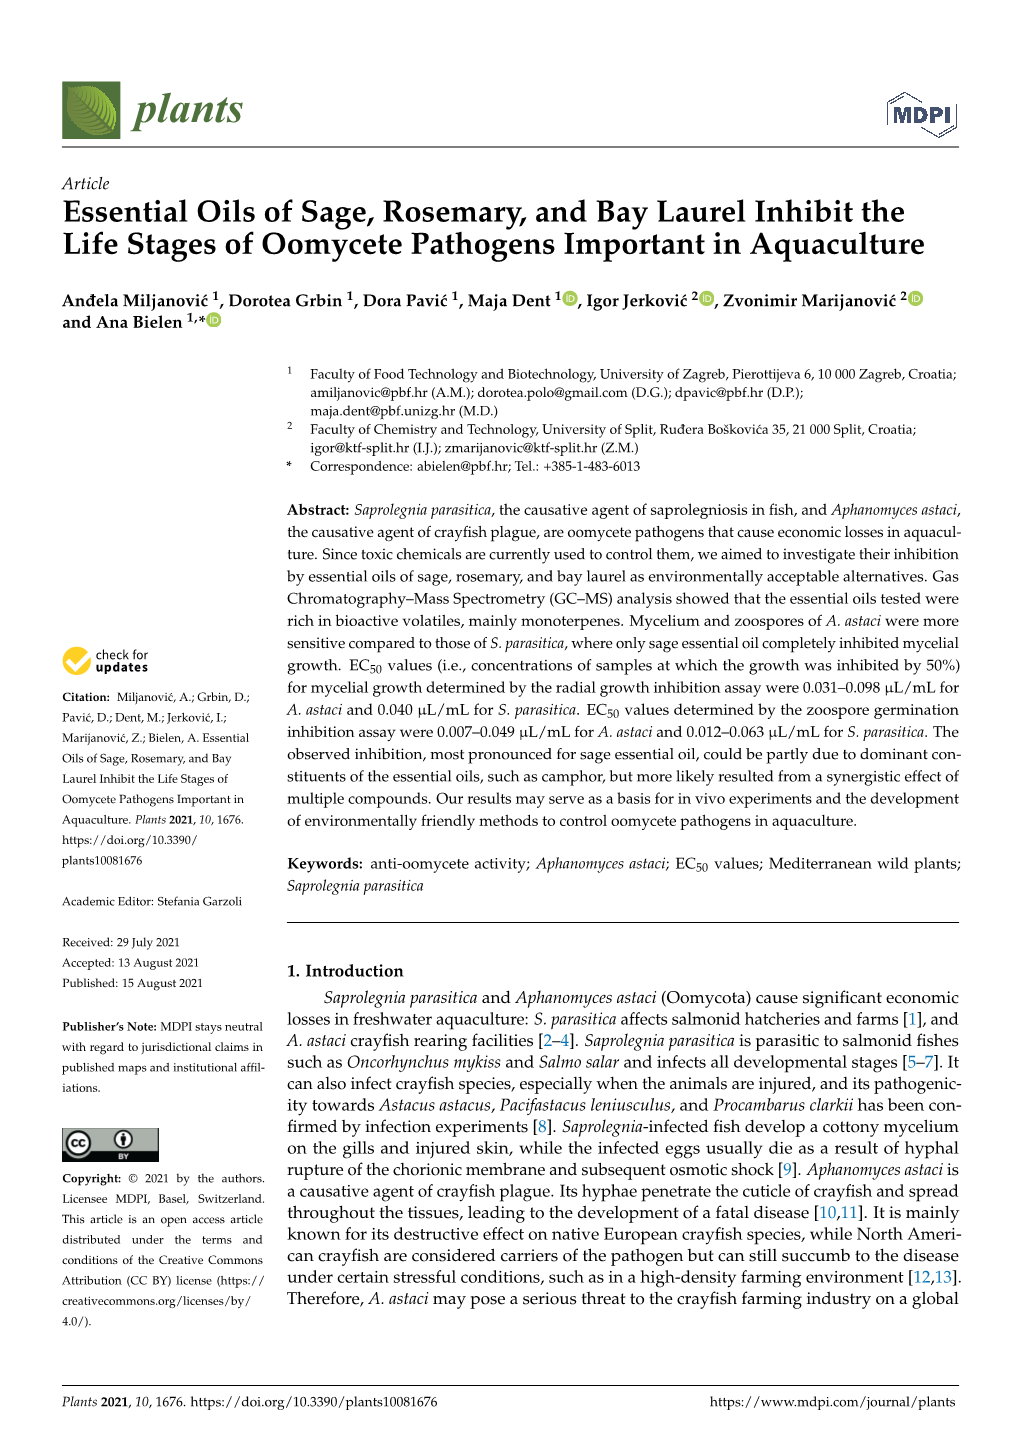 Essential Oils of Sage, Rosemary, and Bay Laurel Inhibit the Life Stages of Oomycete Pathogens Important in Aquaculture